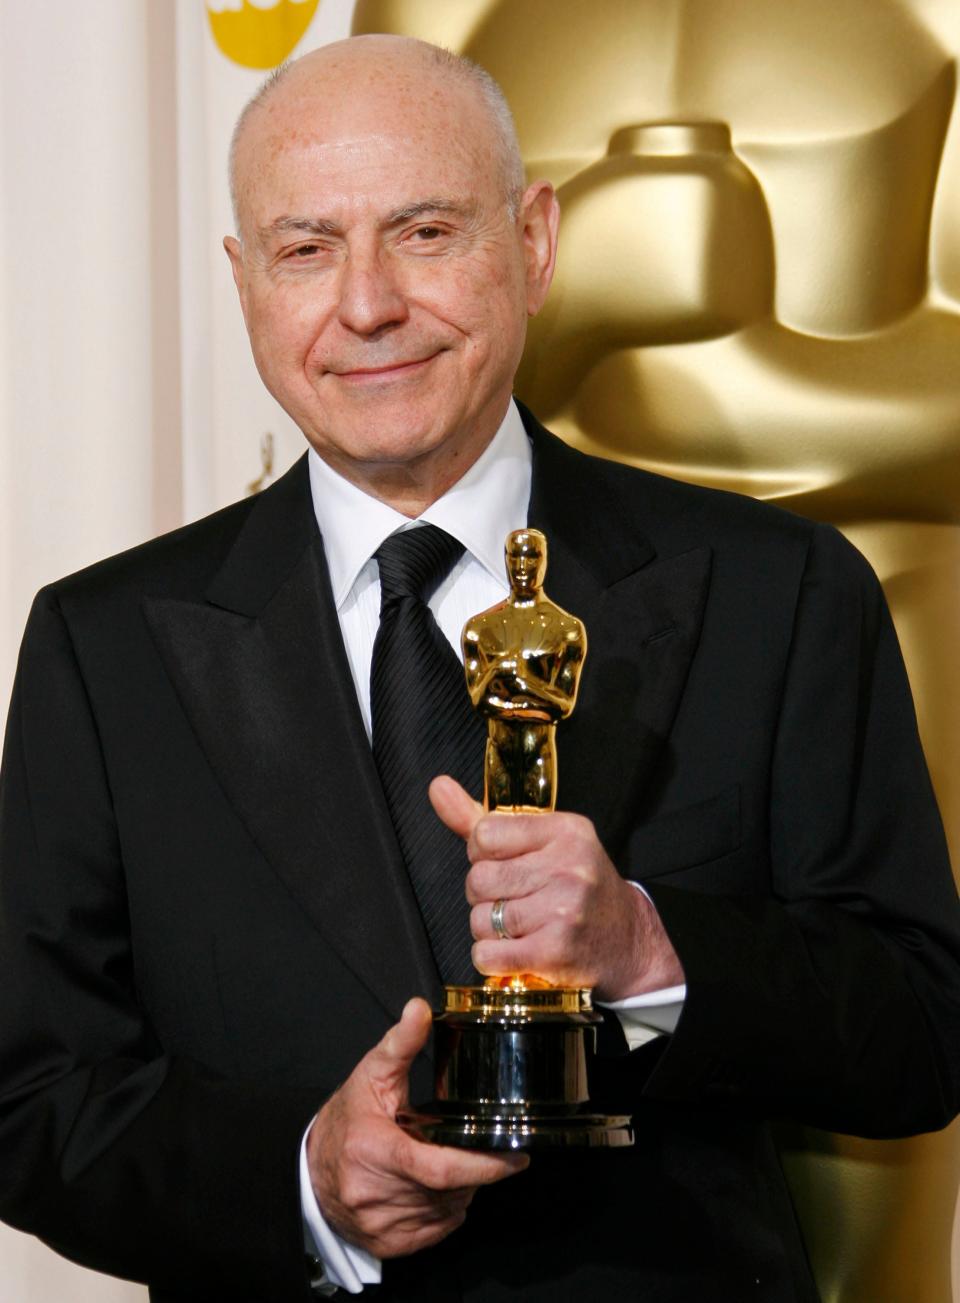 Alan Arkin poses with the Oscar he won as best supporting actor for "Little Miss Sunshine" at the 79th Academy Awards in 2007.